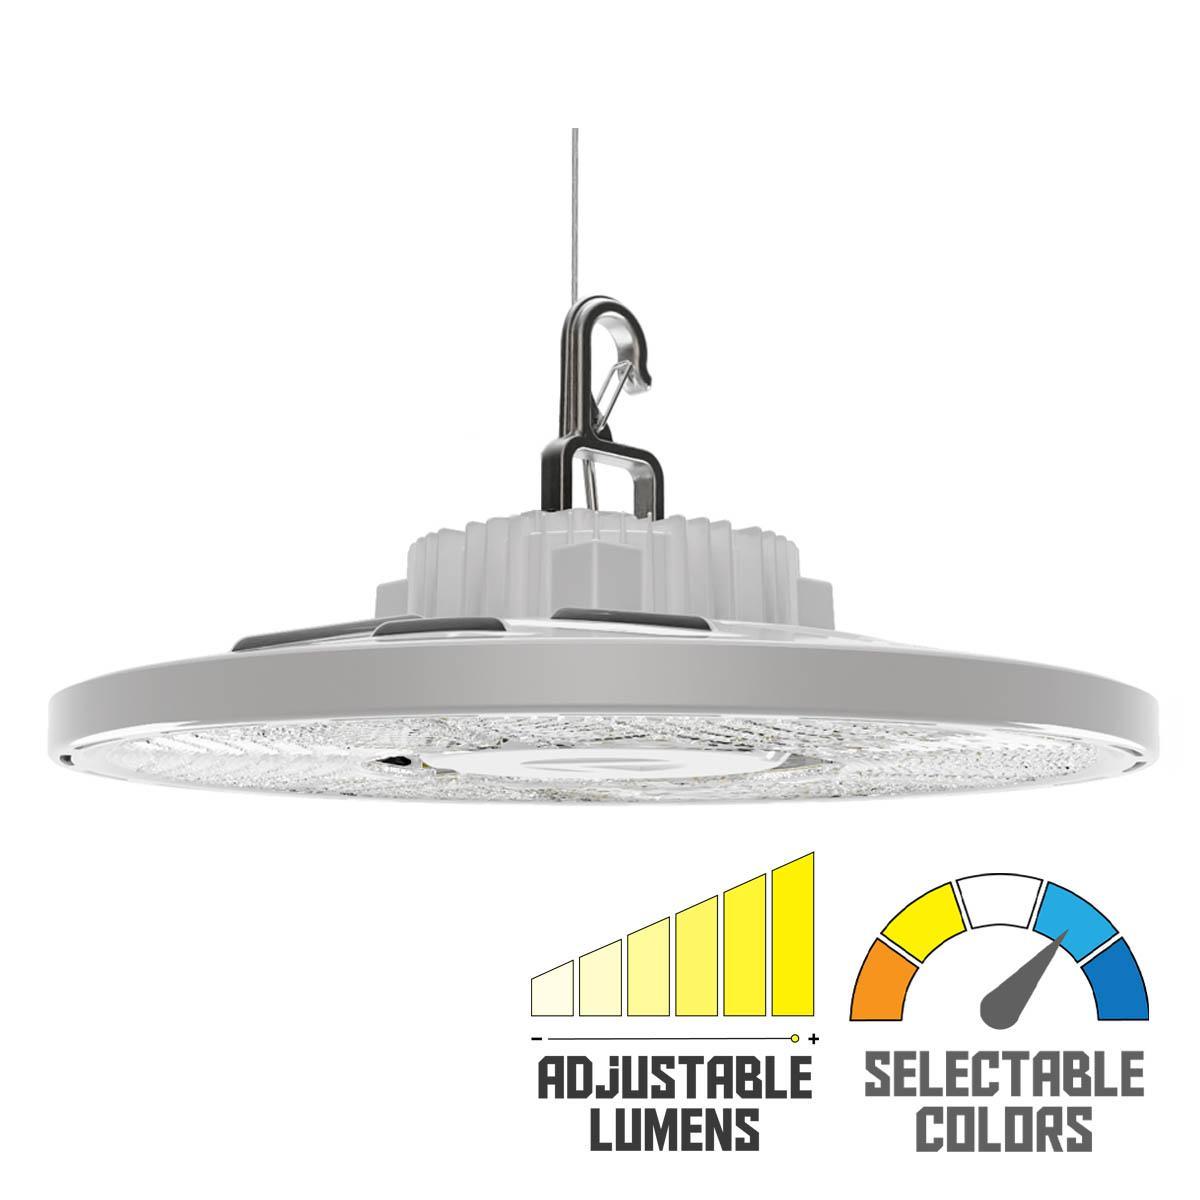 Compact Pro Industrial LED Round High Bay, Selectable 27000 Lumens, 4000K/5000K CCT, 120-347V, White - Bees Lighting